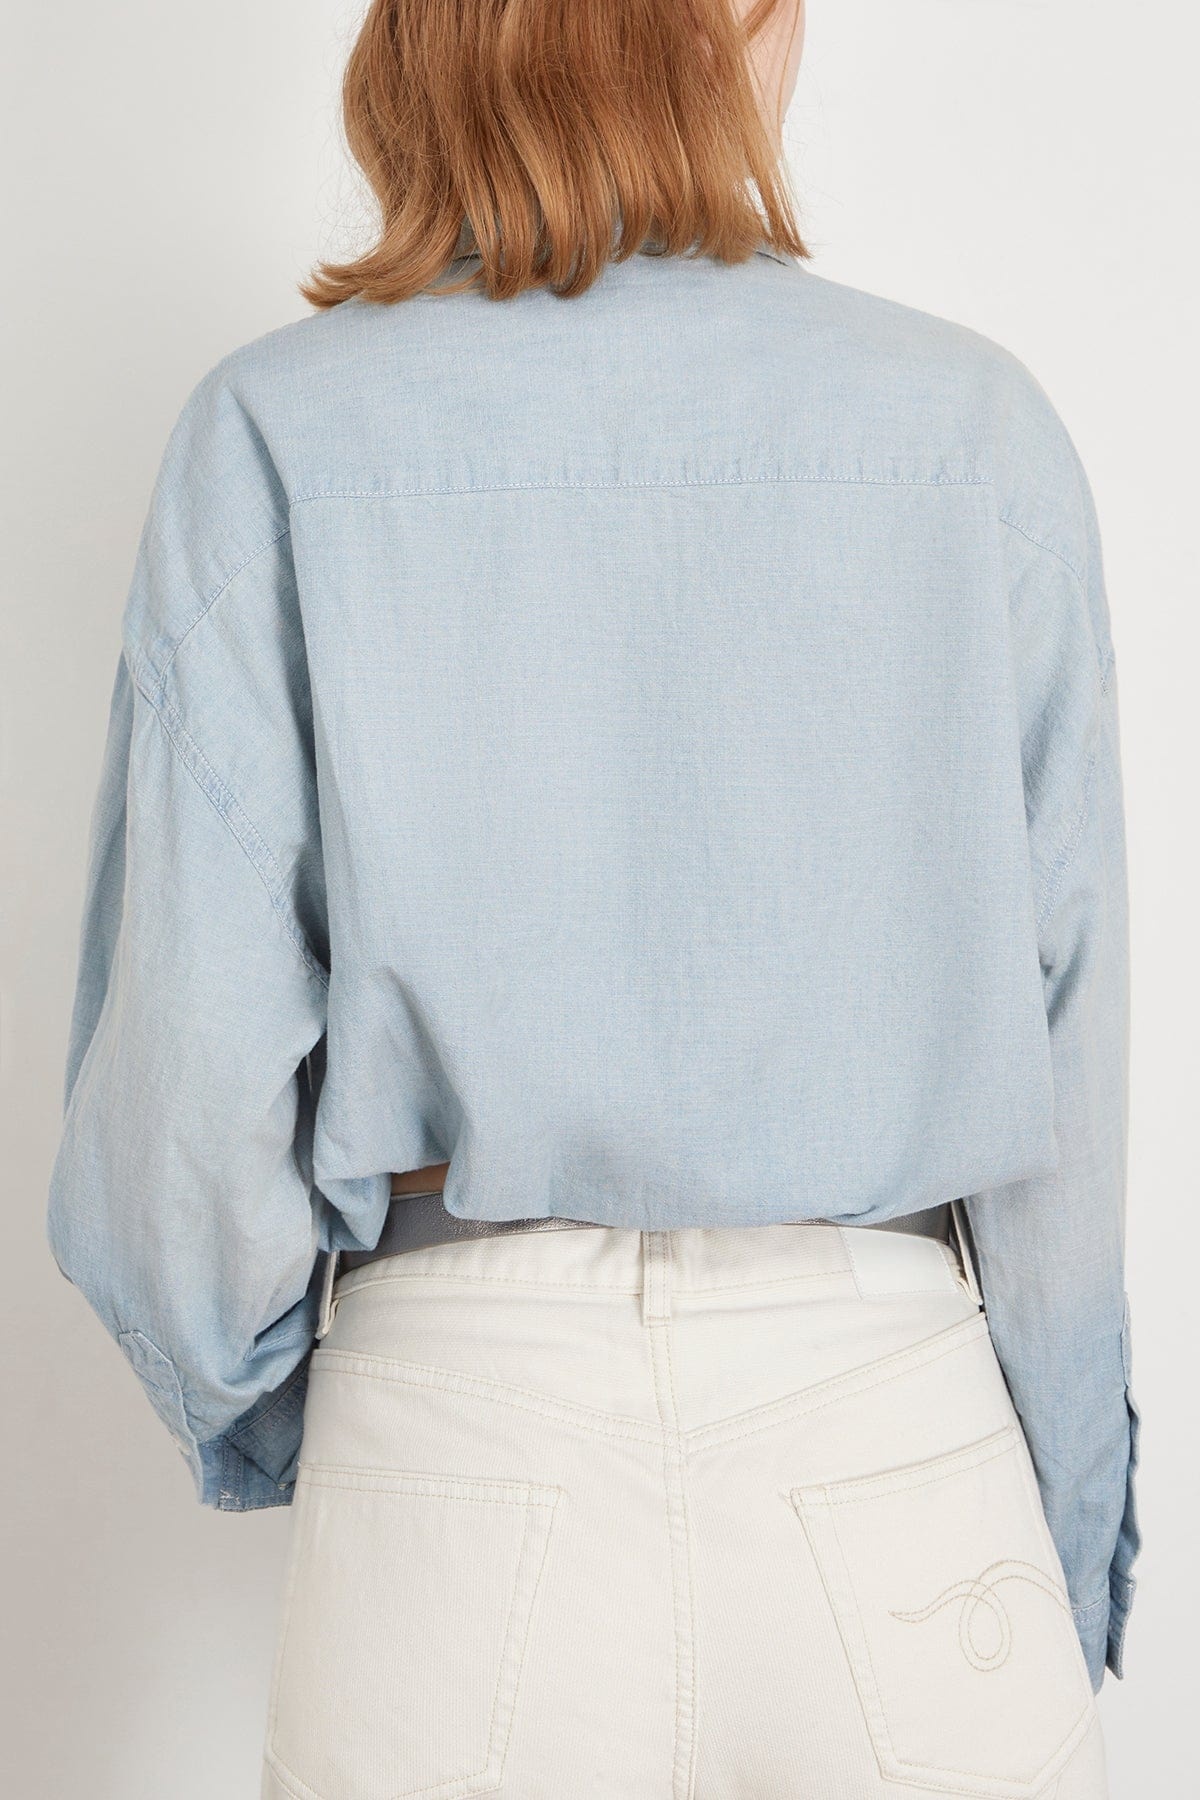 Crossover Utility Bubble Shirt in Vintage Blue Chambray - 4